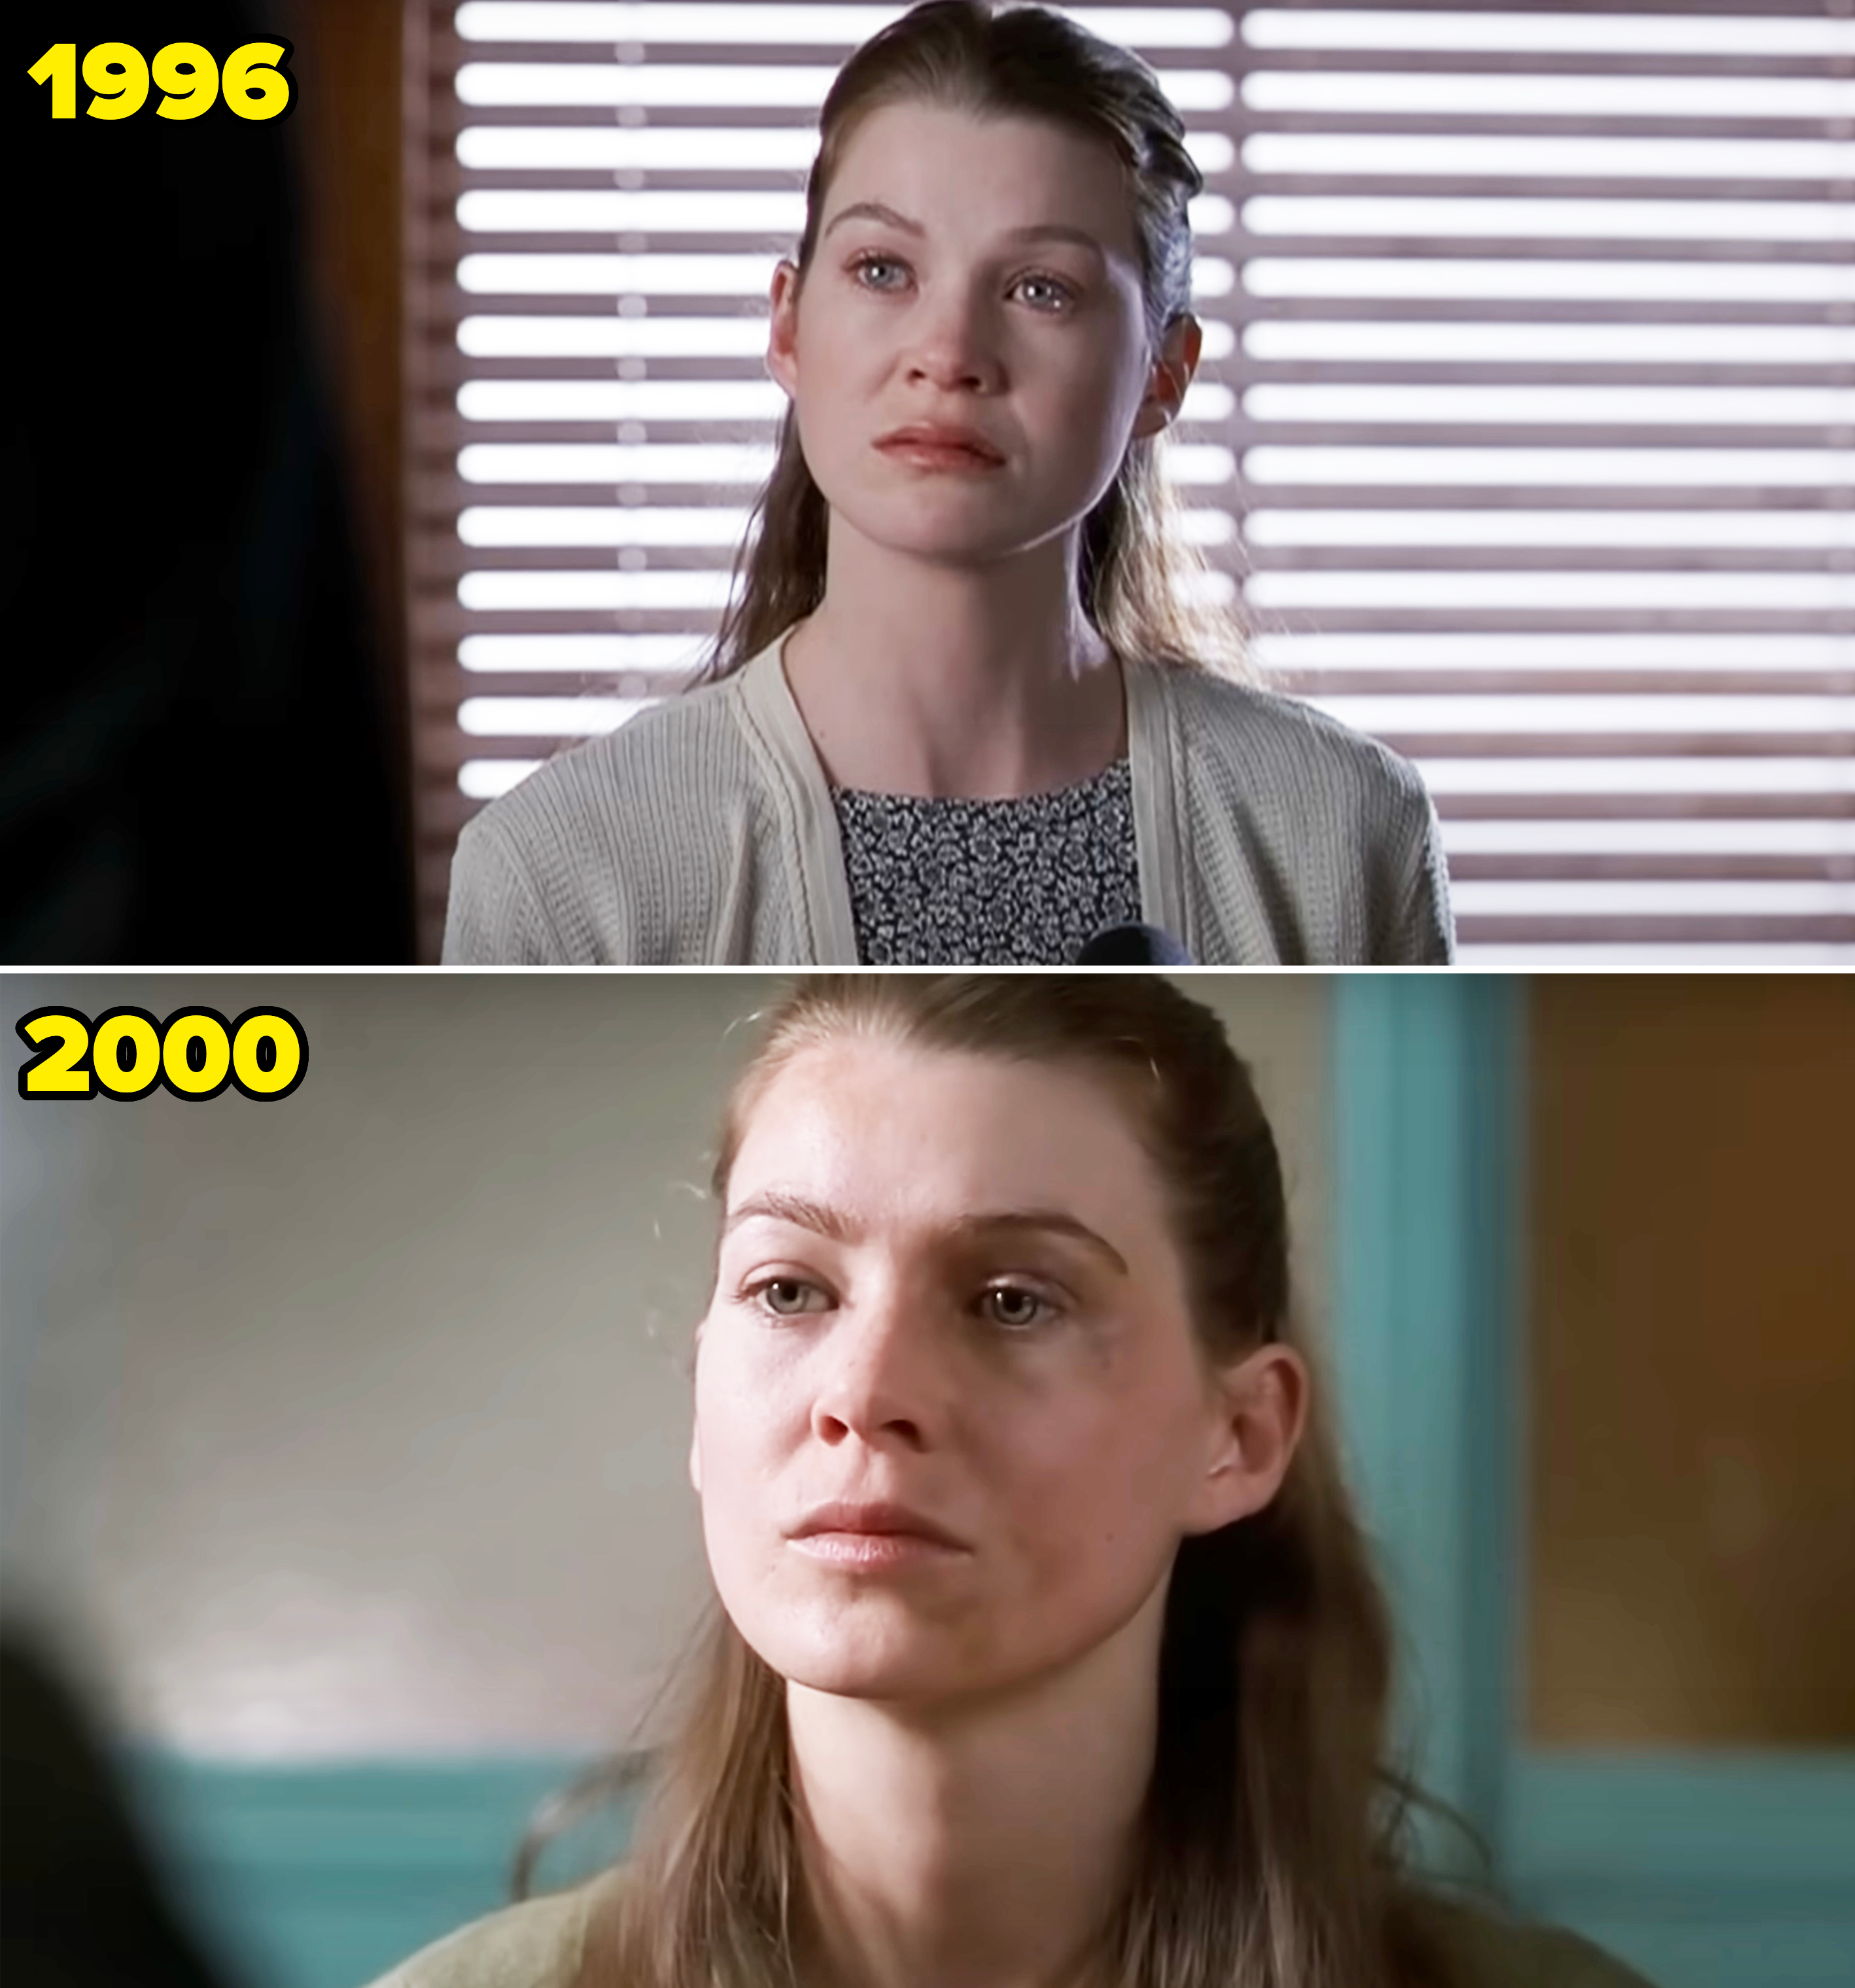 her in 1996 and 2000